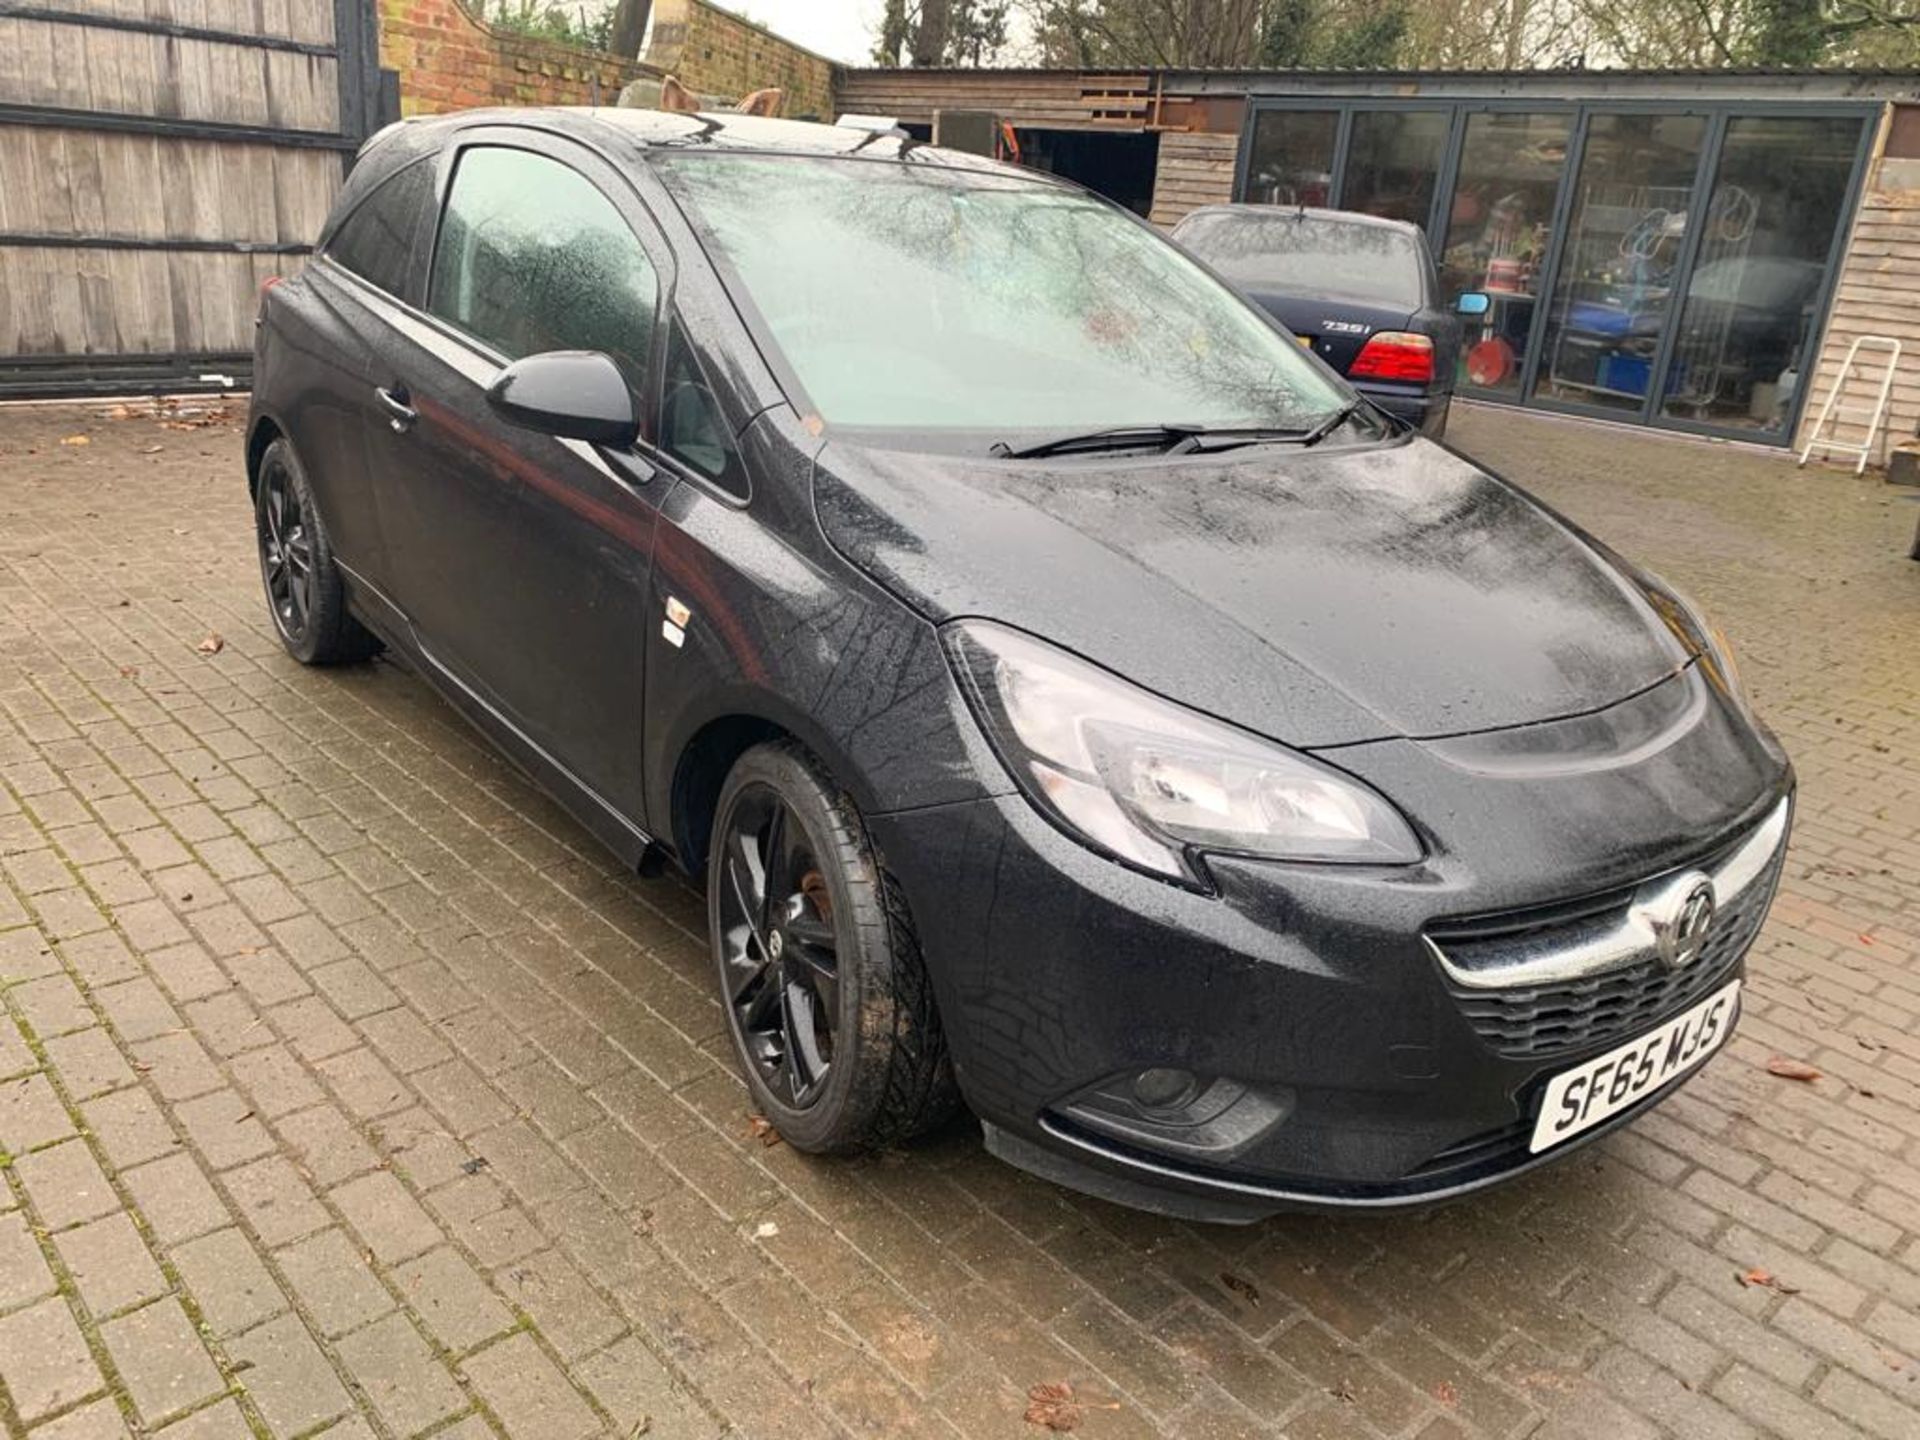 2016/65 REG VAUXHALL CORSA LIMITED EDITION 1.4 PETROL 3 DOOR HATCHBACK, SHOWING 2 FORMER KEEPERS